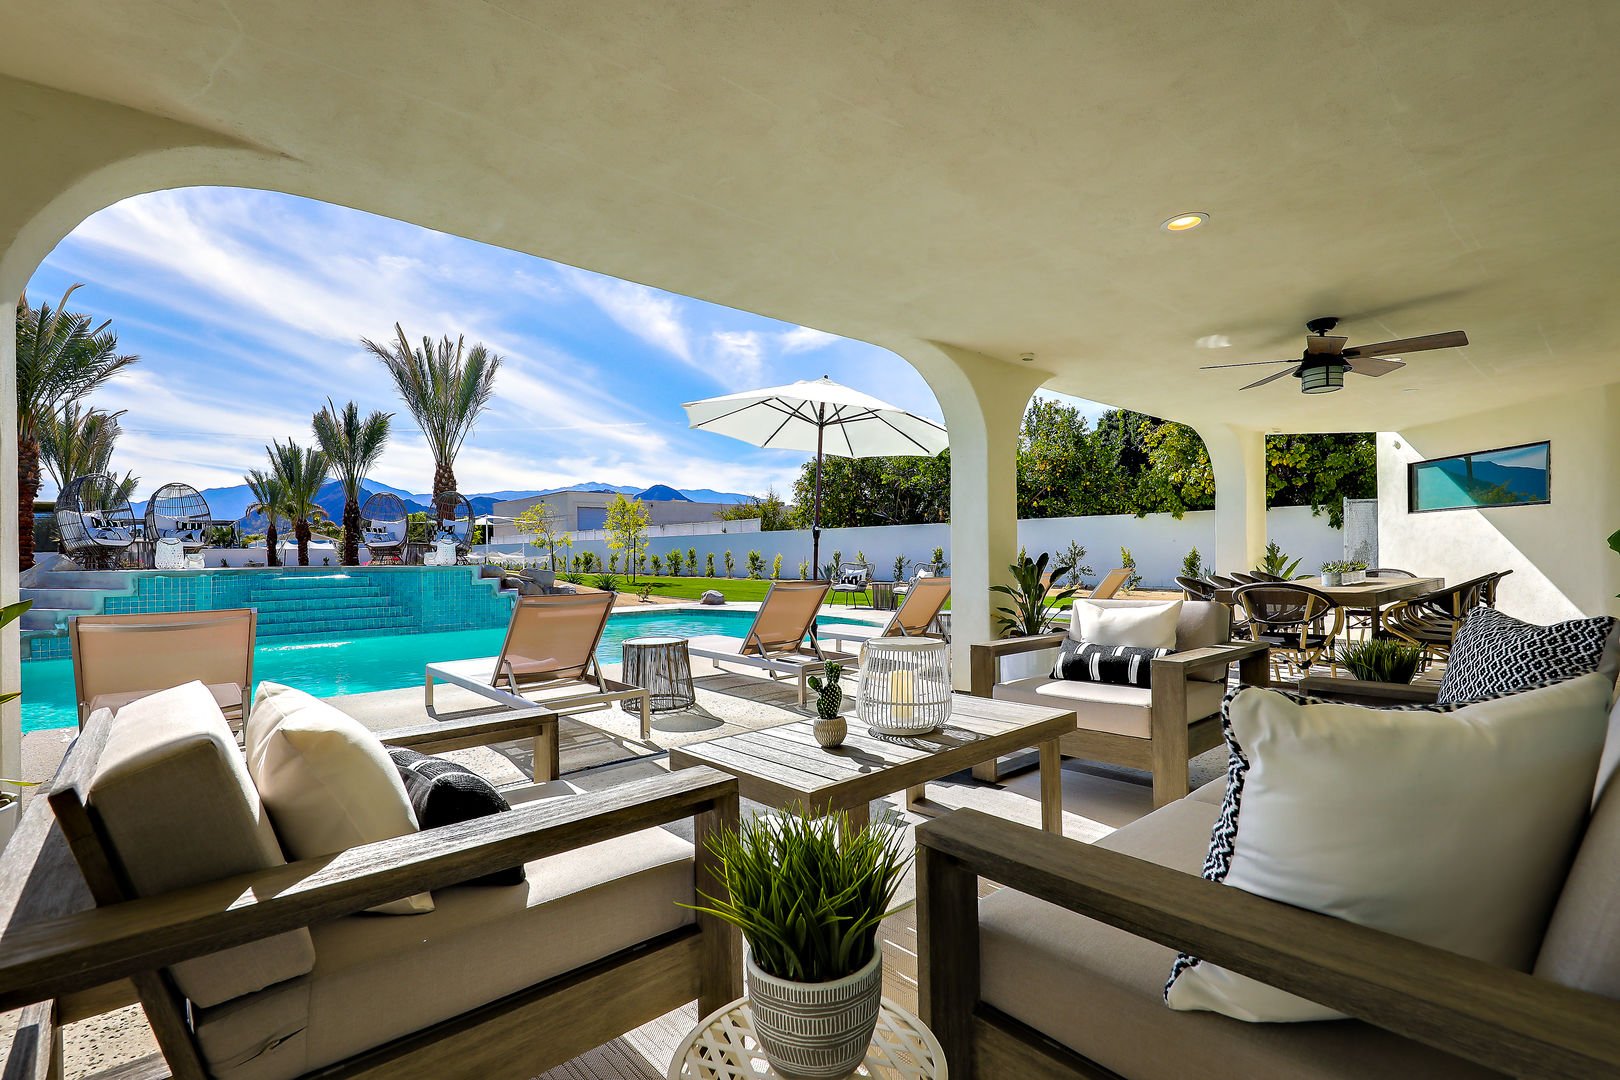 Outdoor seating set by the pool in our vacation rental in the Palm Desert area